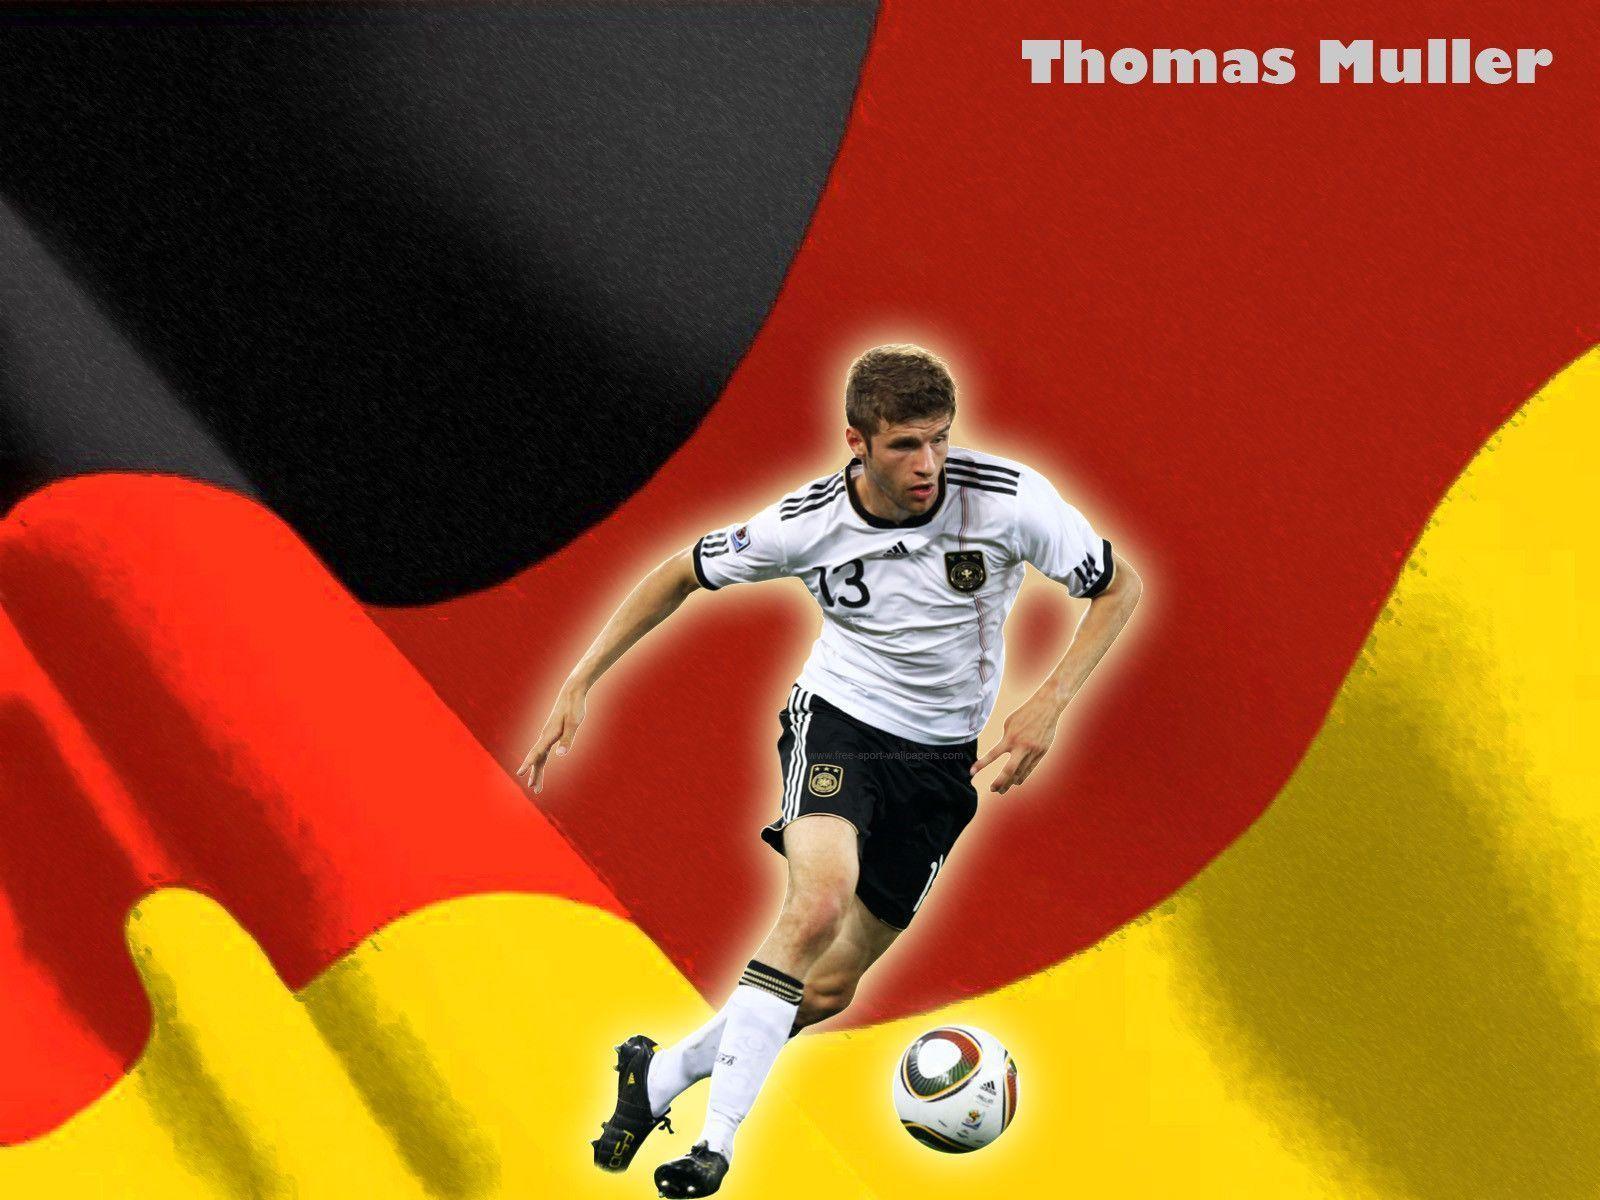 Thomas Muller with Germany flags wallpaper in HD for free download